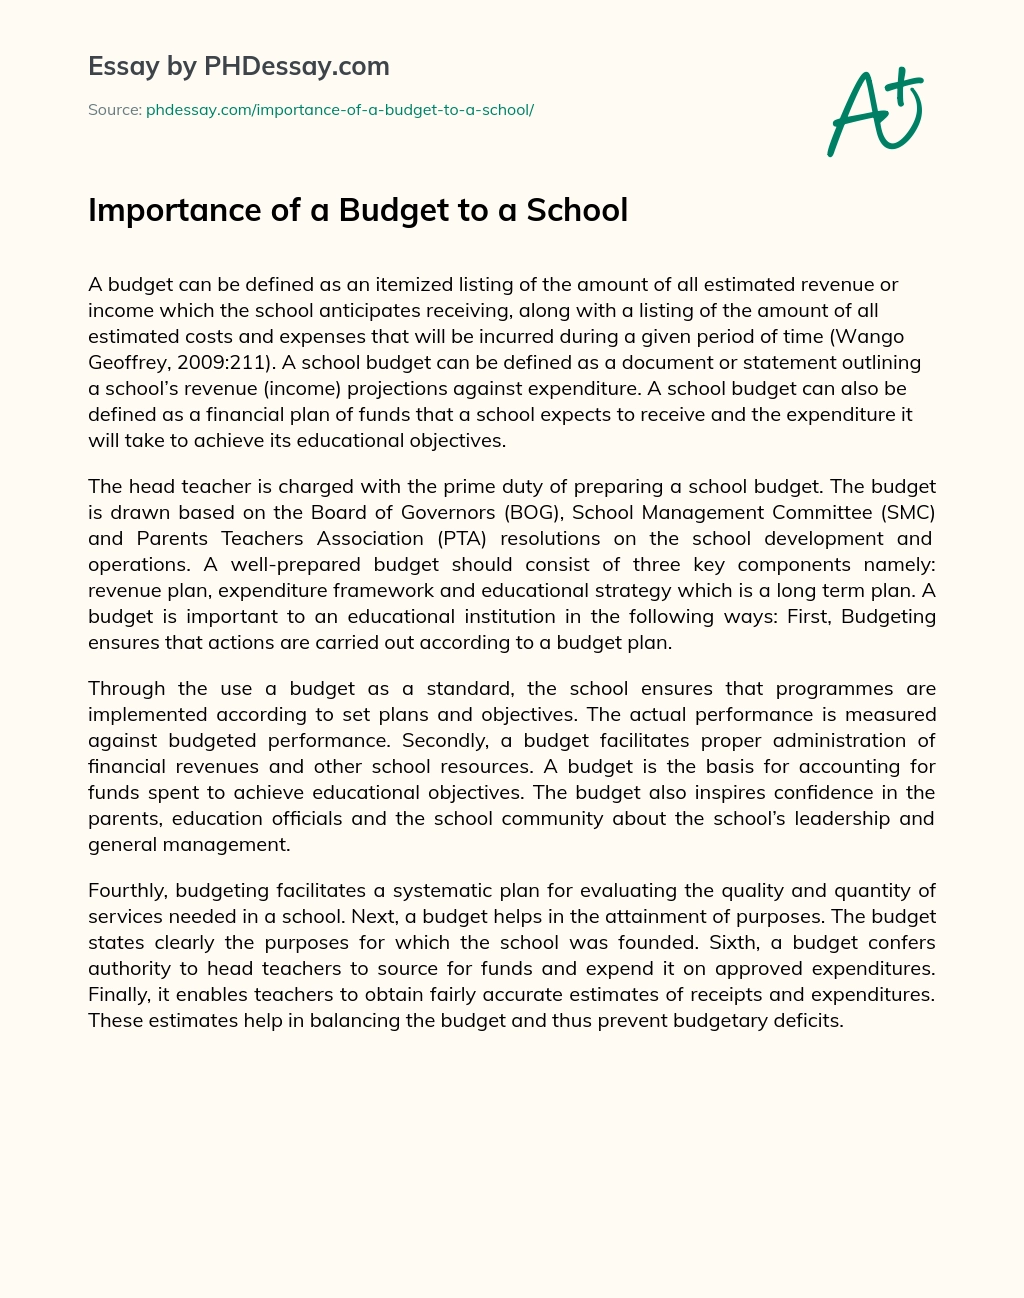 Importance of a Budget to a School essay